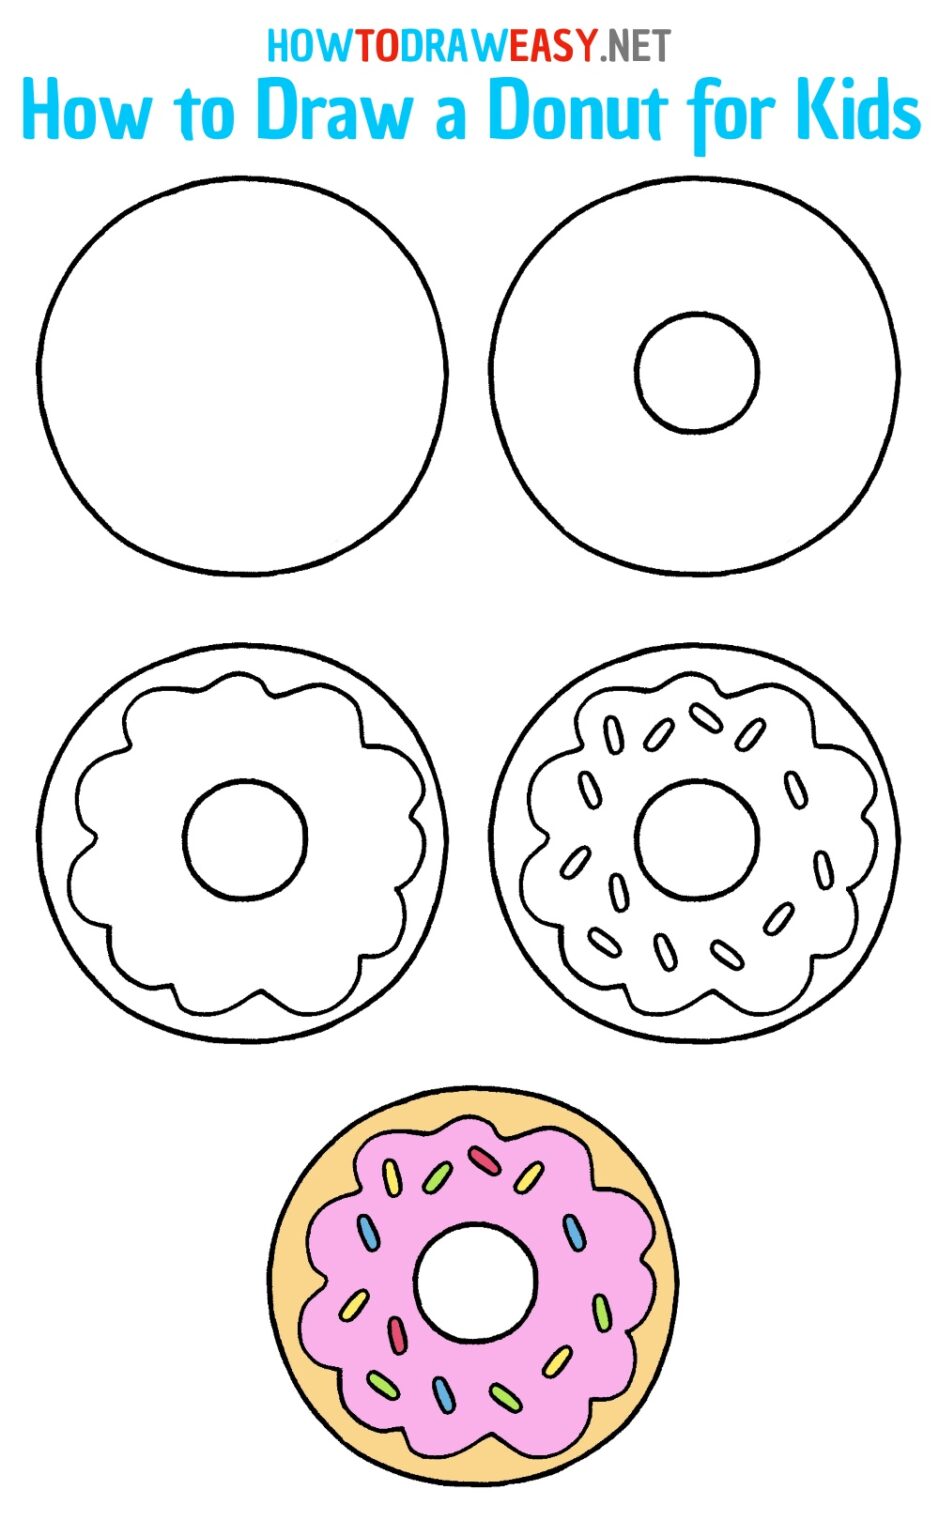 How to Draw a Donut for Kids - How to Draw Easy